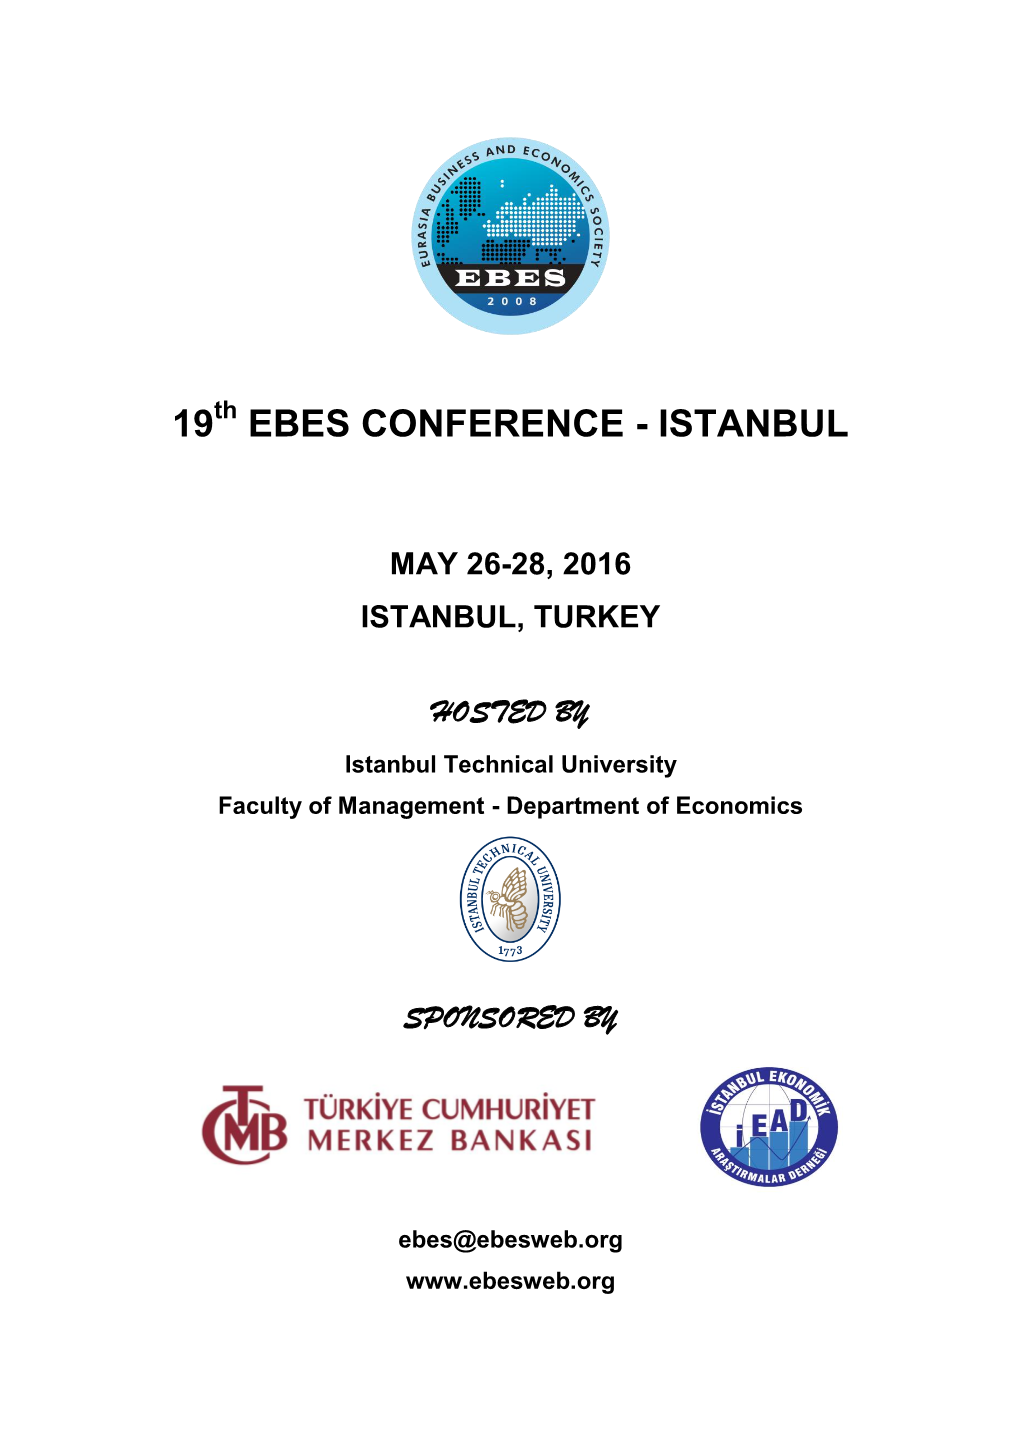 19 Ebes Conference